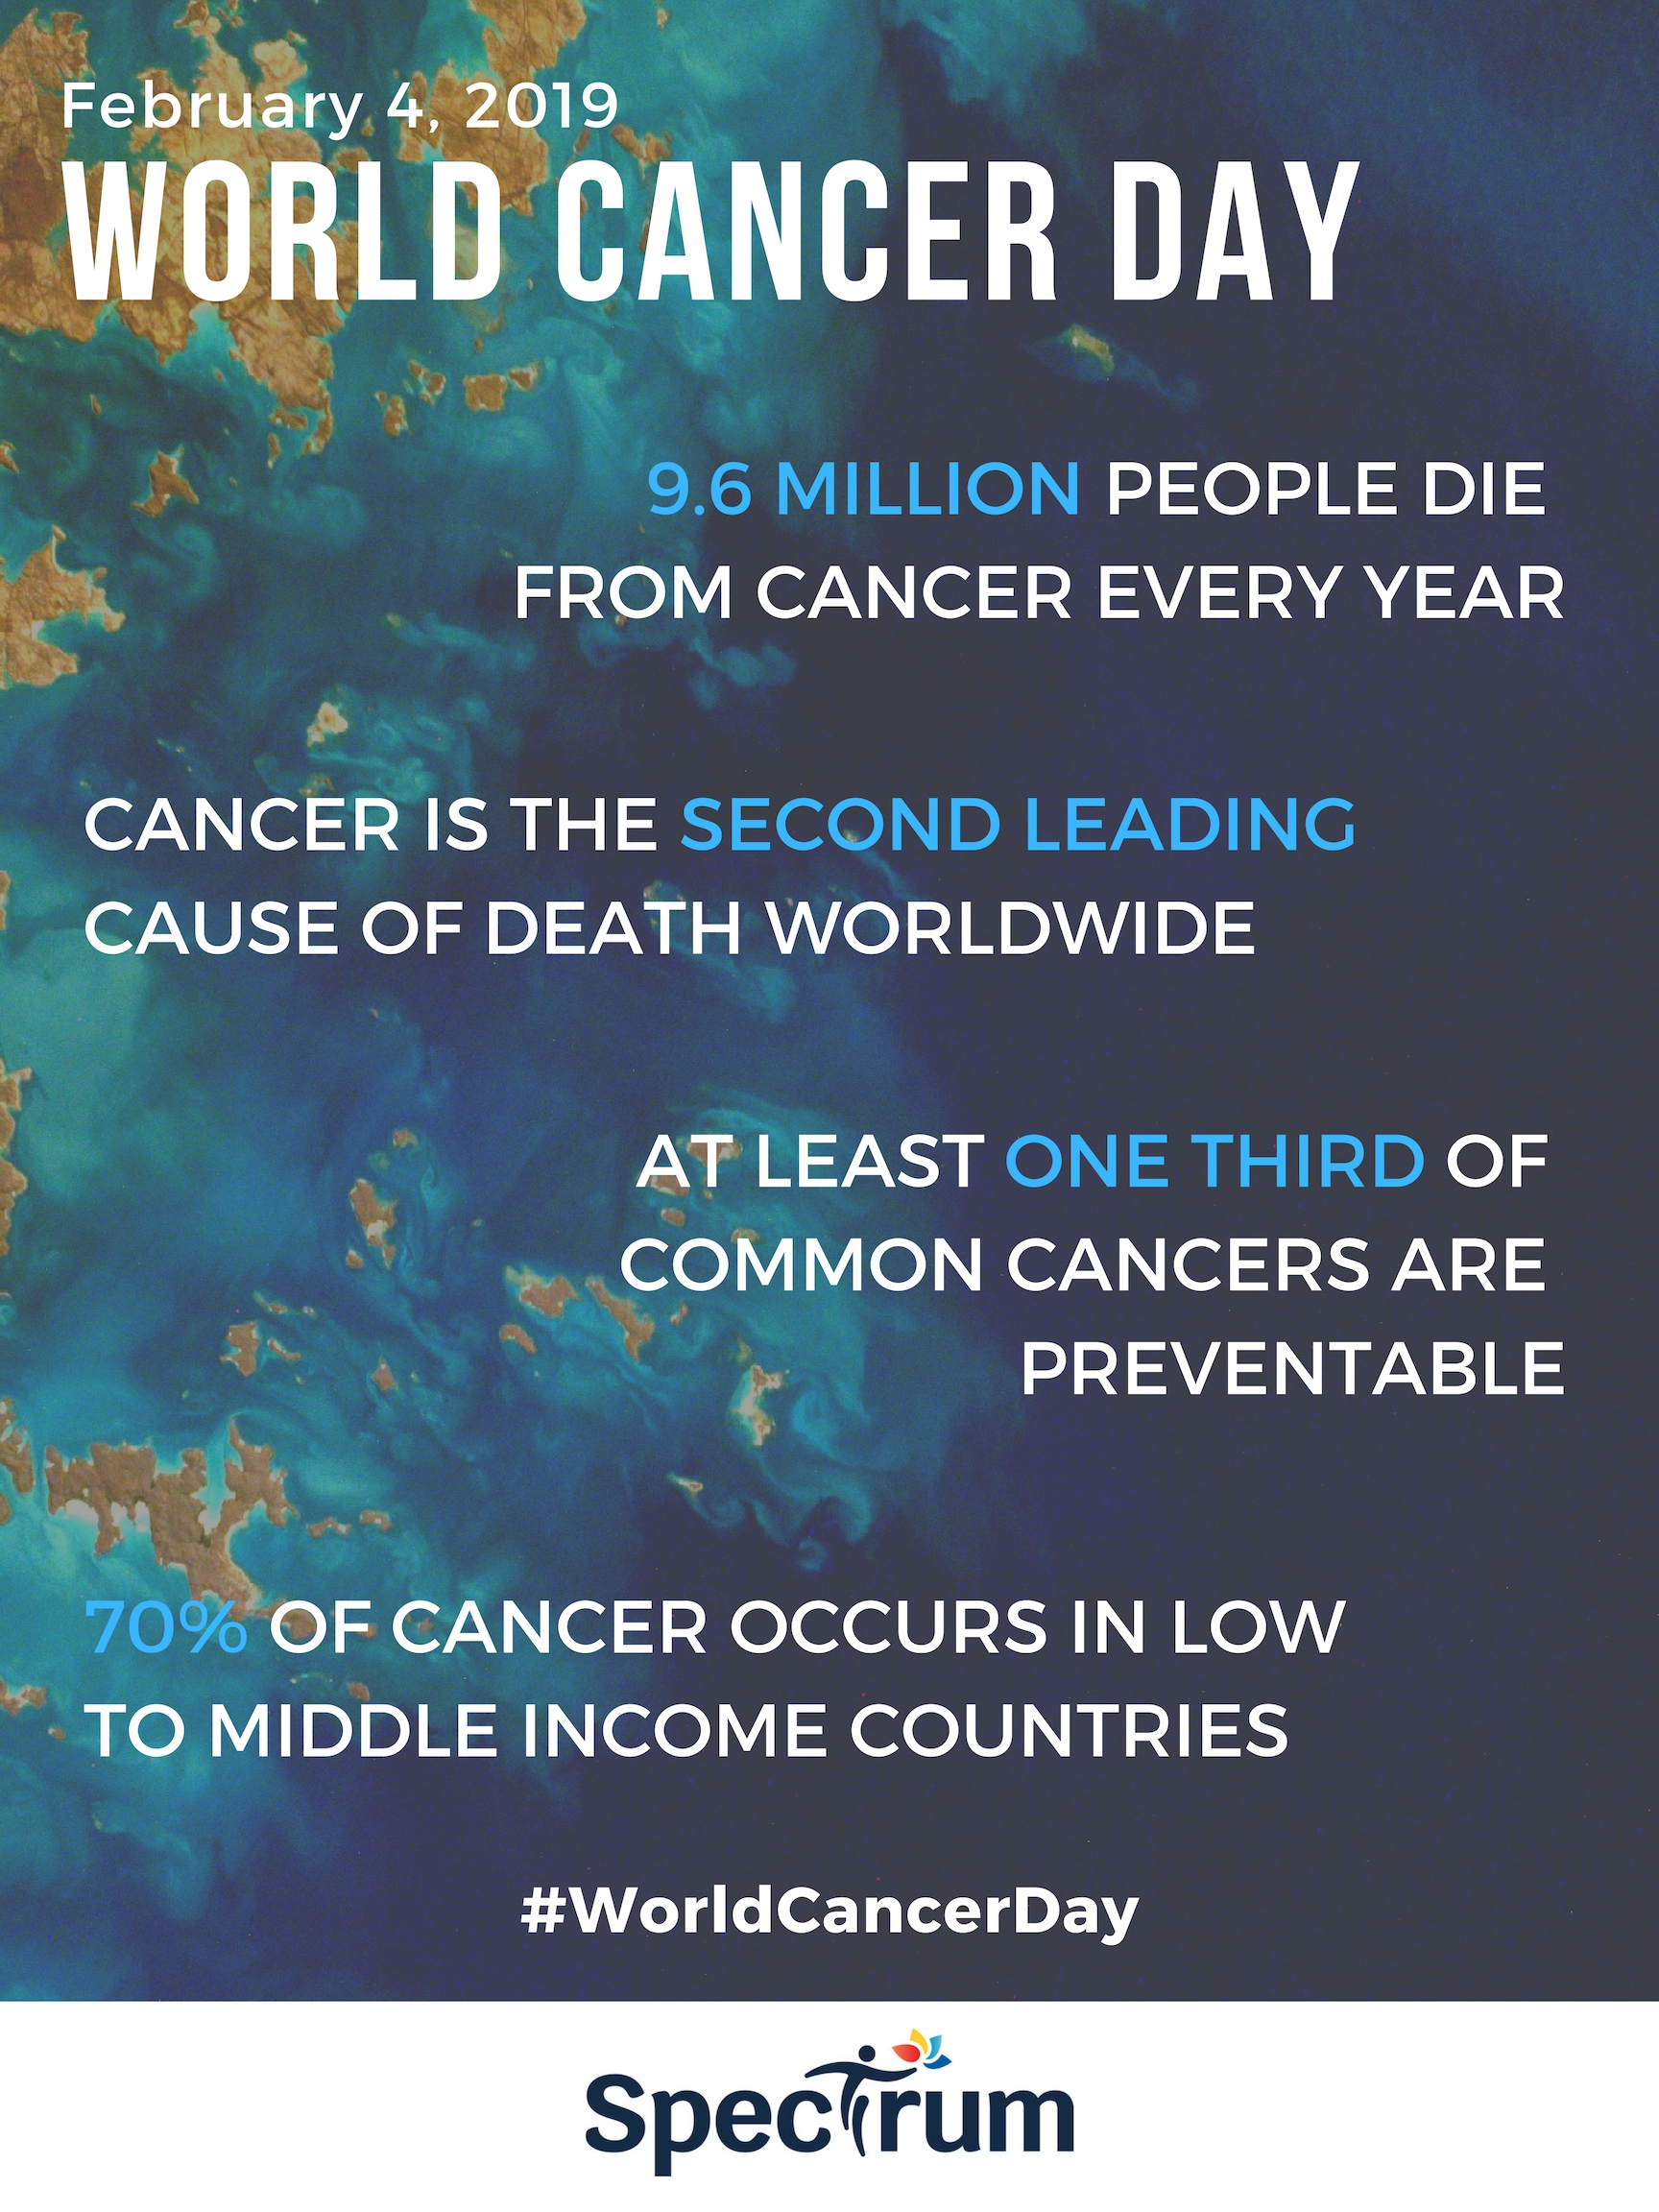 Image: Today is World Cancer Day